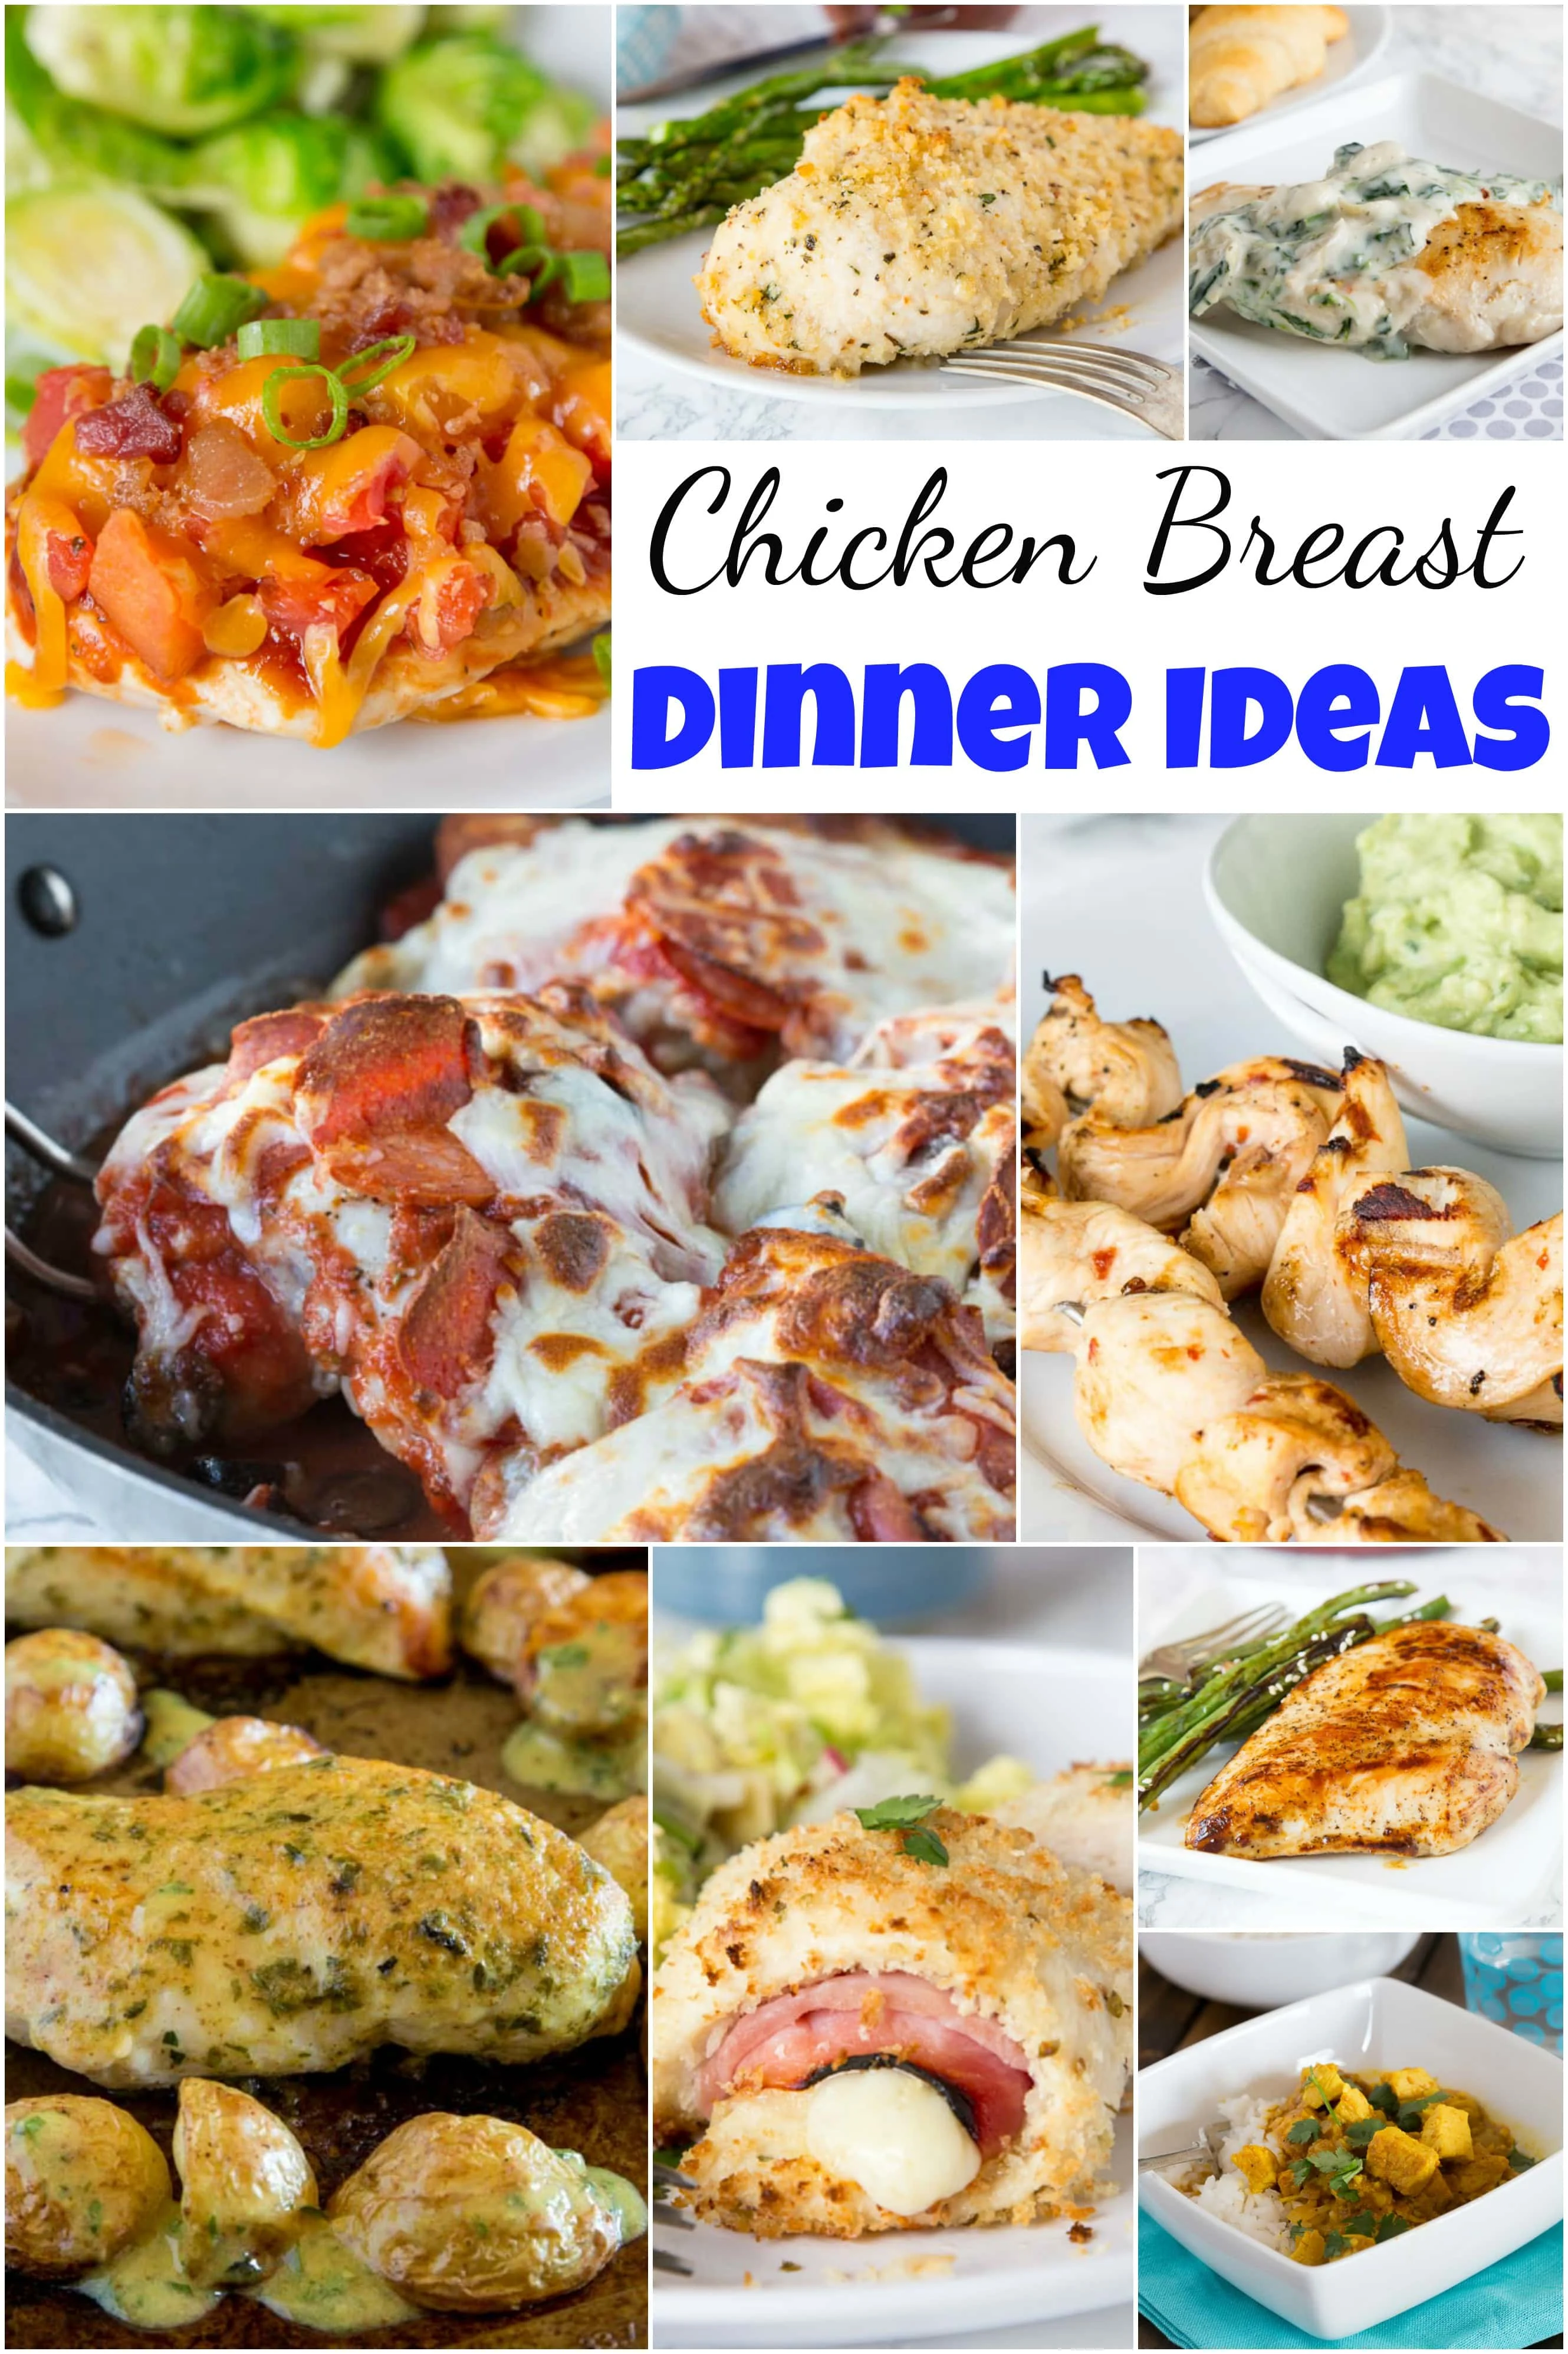 Chicken Breast Dinner Ideas - stock up when chicken breasts are on sale, because here are 25 new and fun chicken dinner ideas to break up your week!